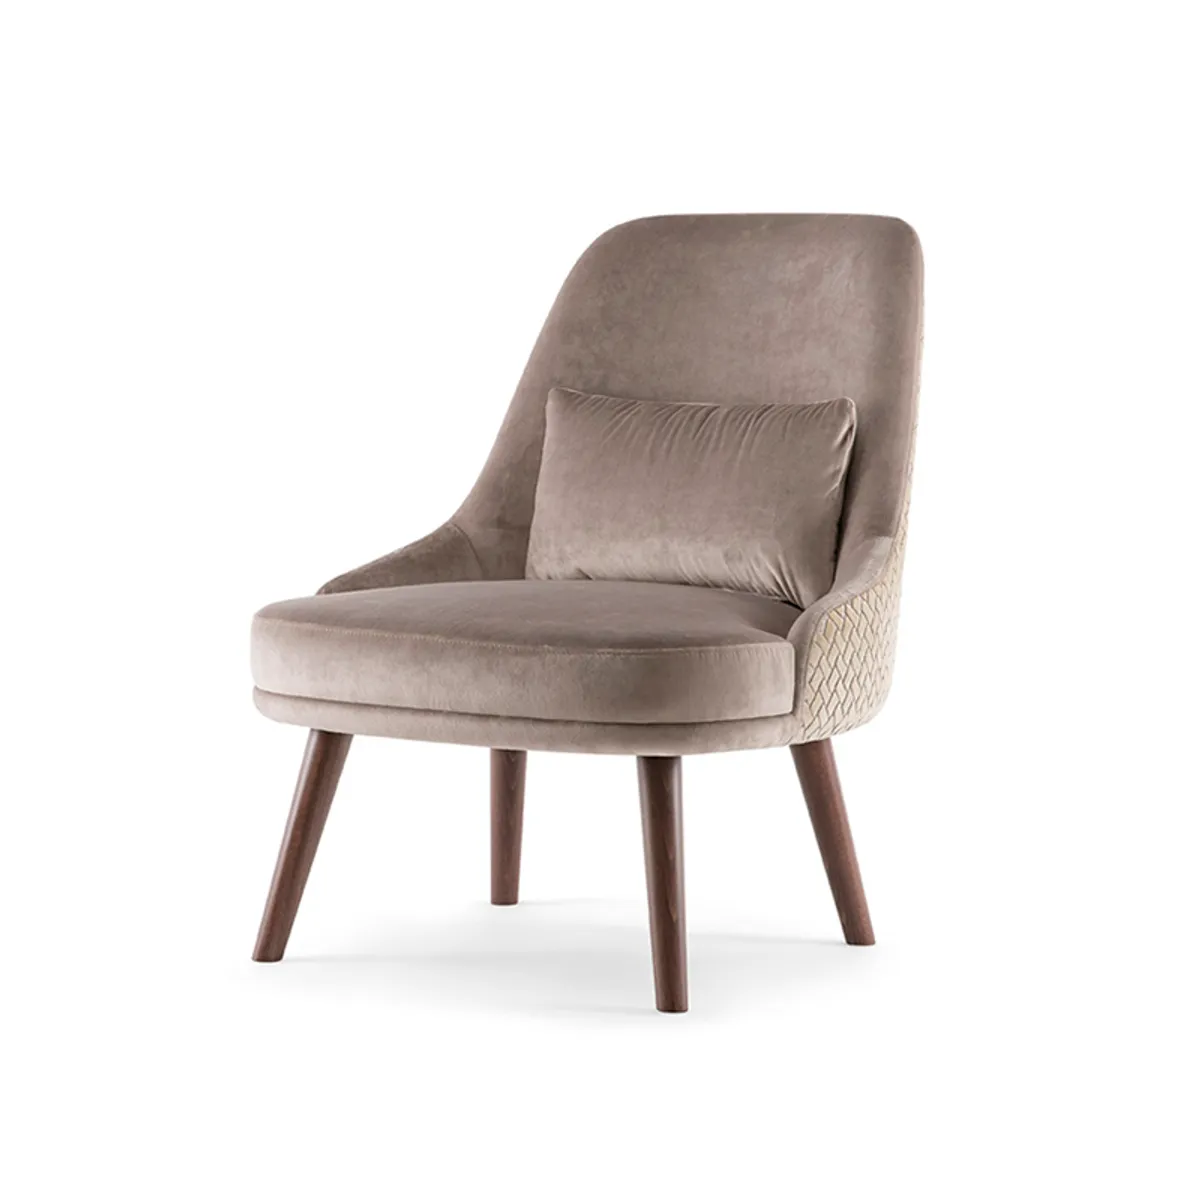 Nandie Lounge Chair Healthcare Furniture Nude Upholstery And Wooden Legs Insideoutcontracts